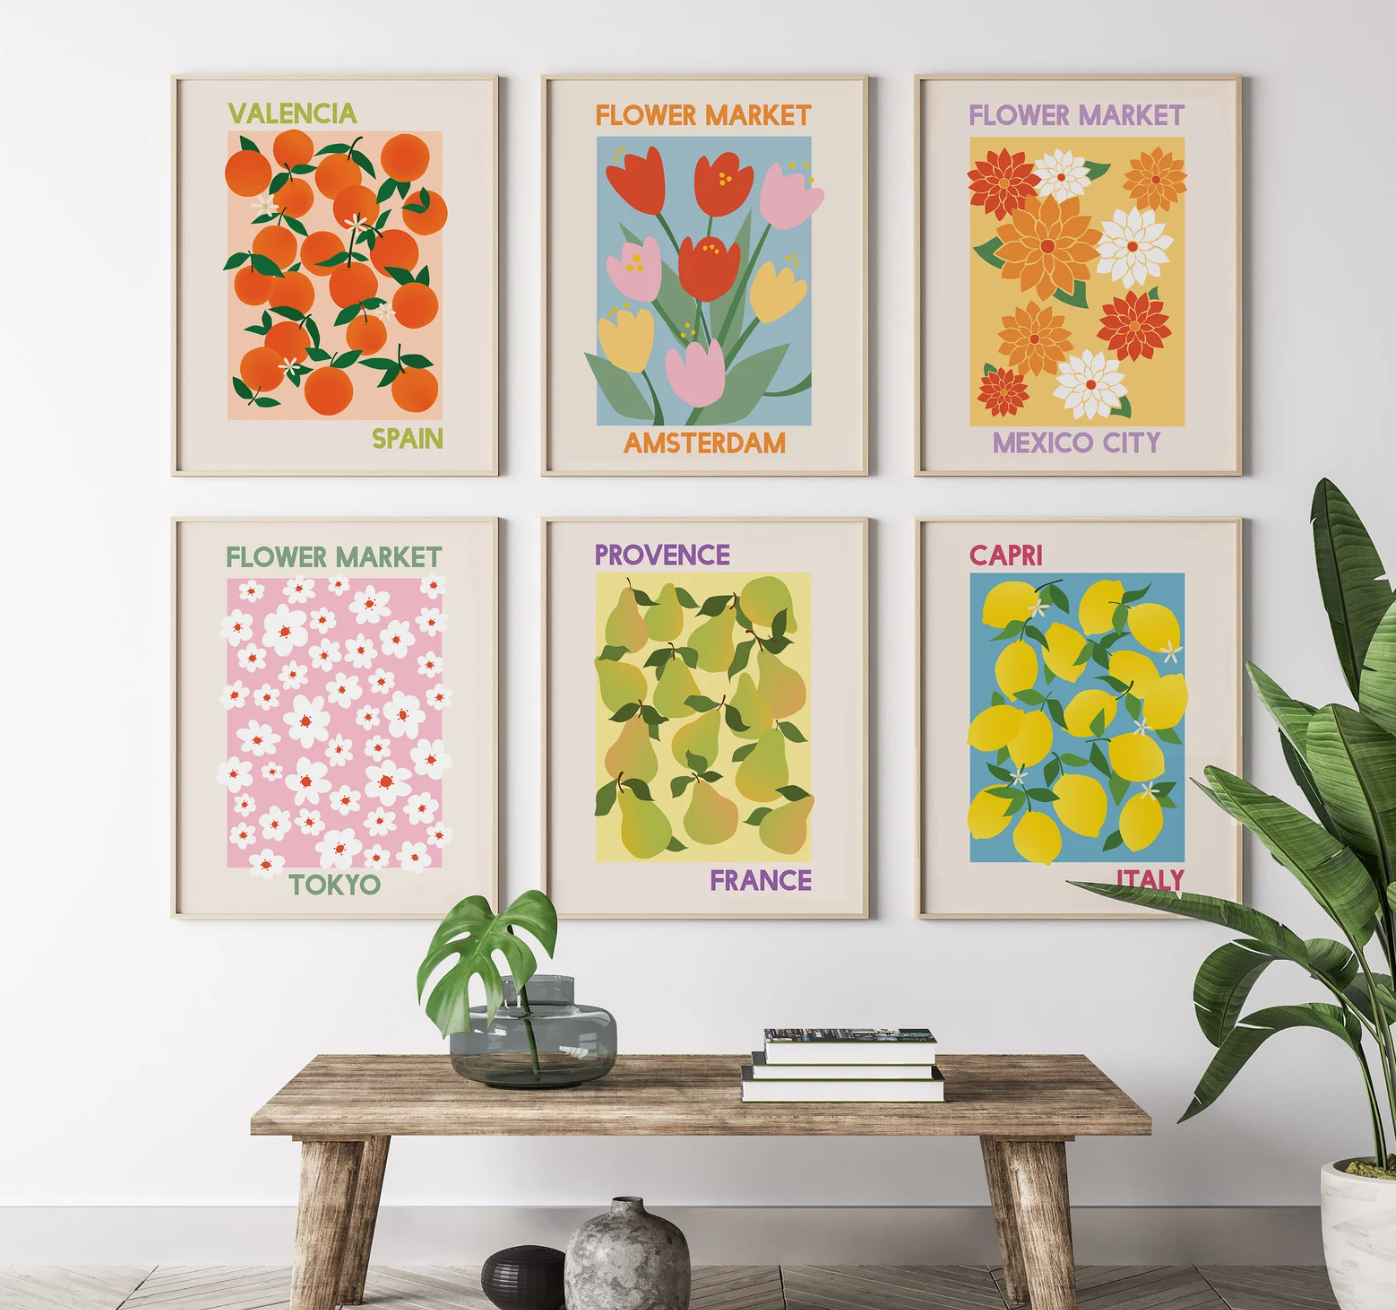 colorful digital art prints with global flowers and fruits in square frames behind wooden bench